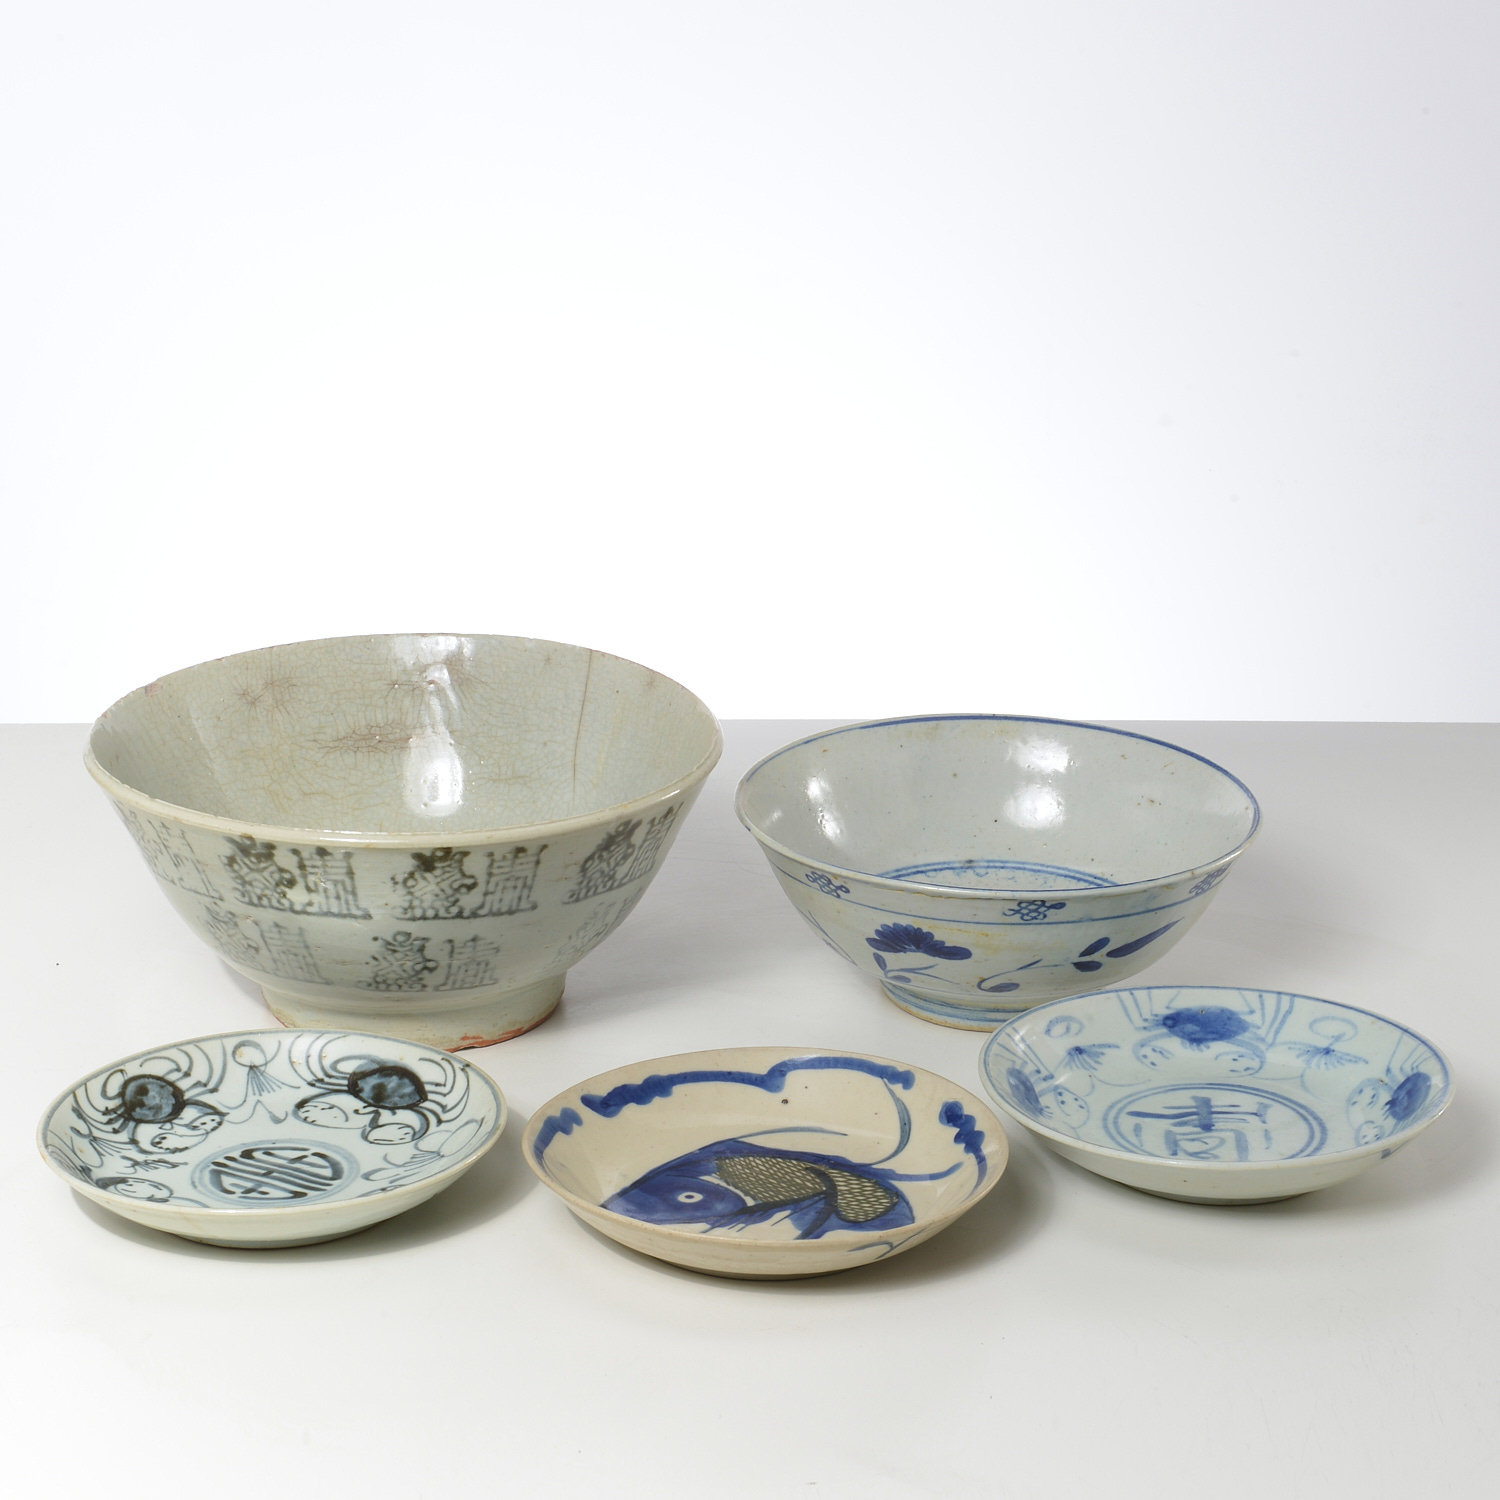 GROUP 5 CHINESE SWATOW PORCELAINS 2ced1e